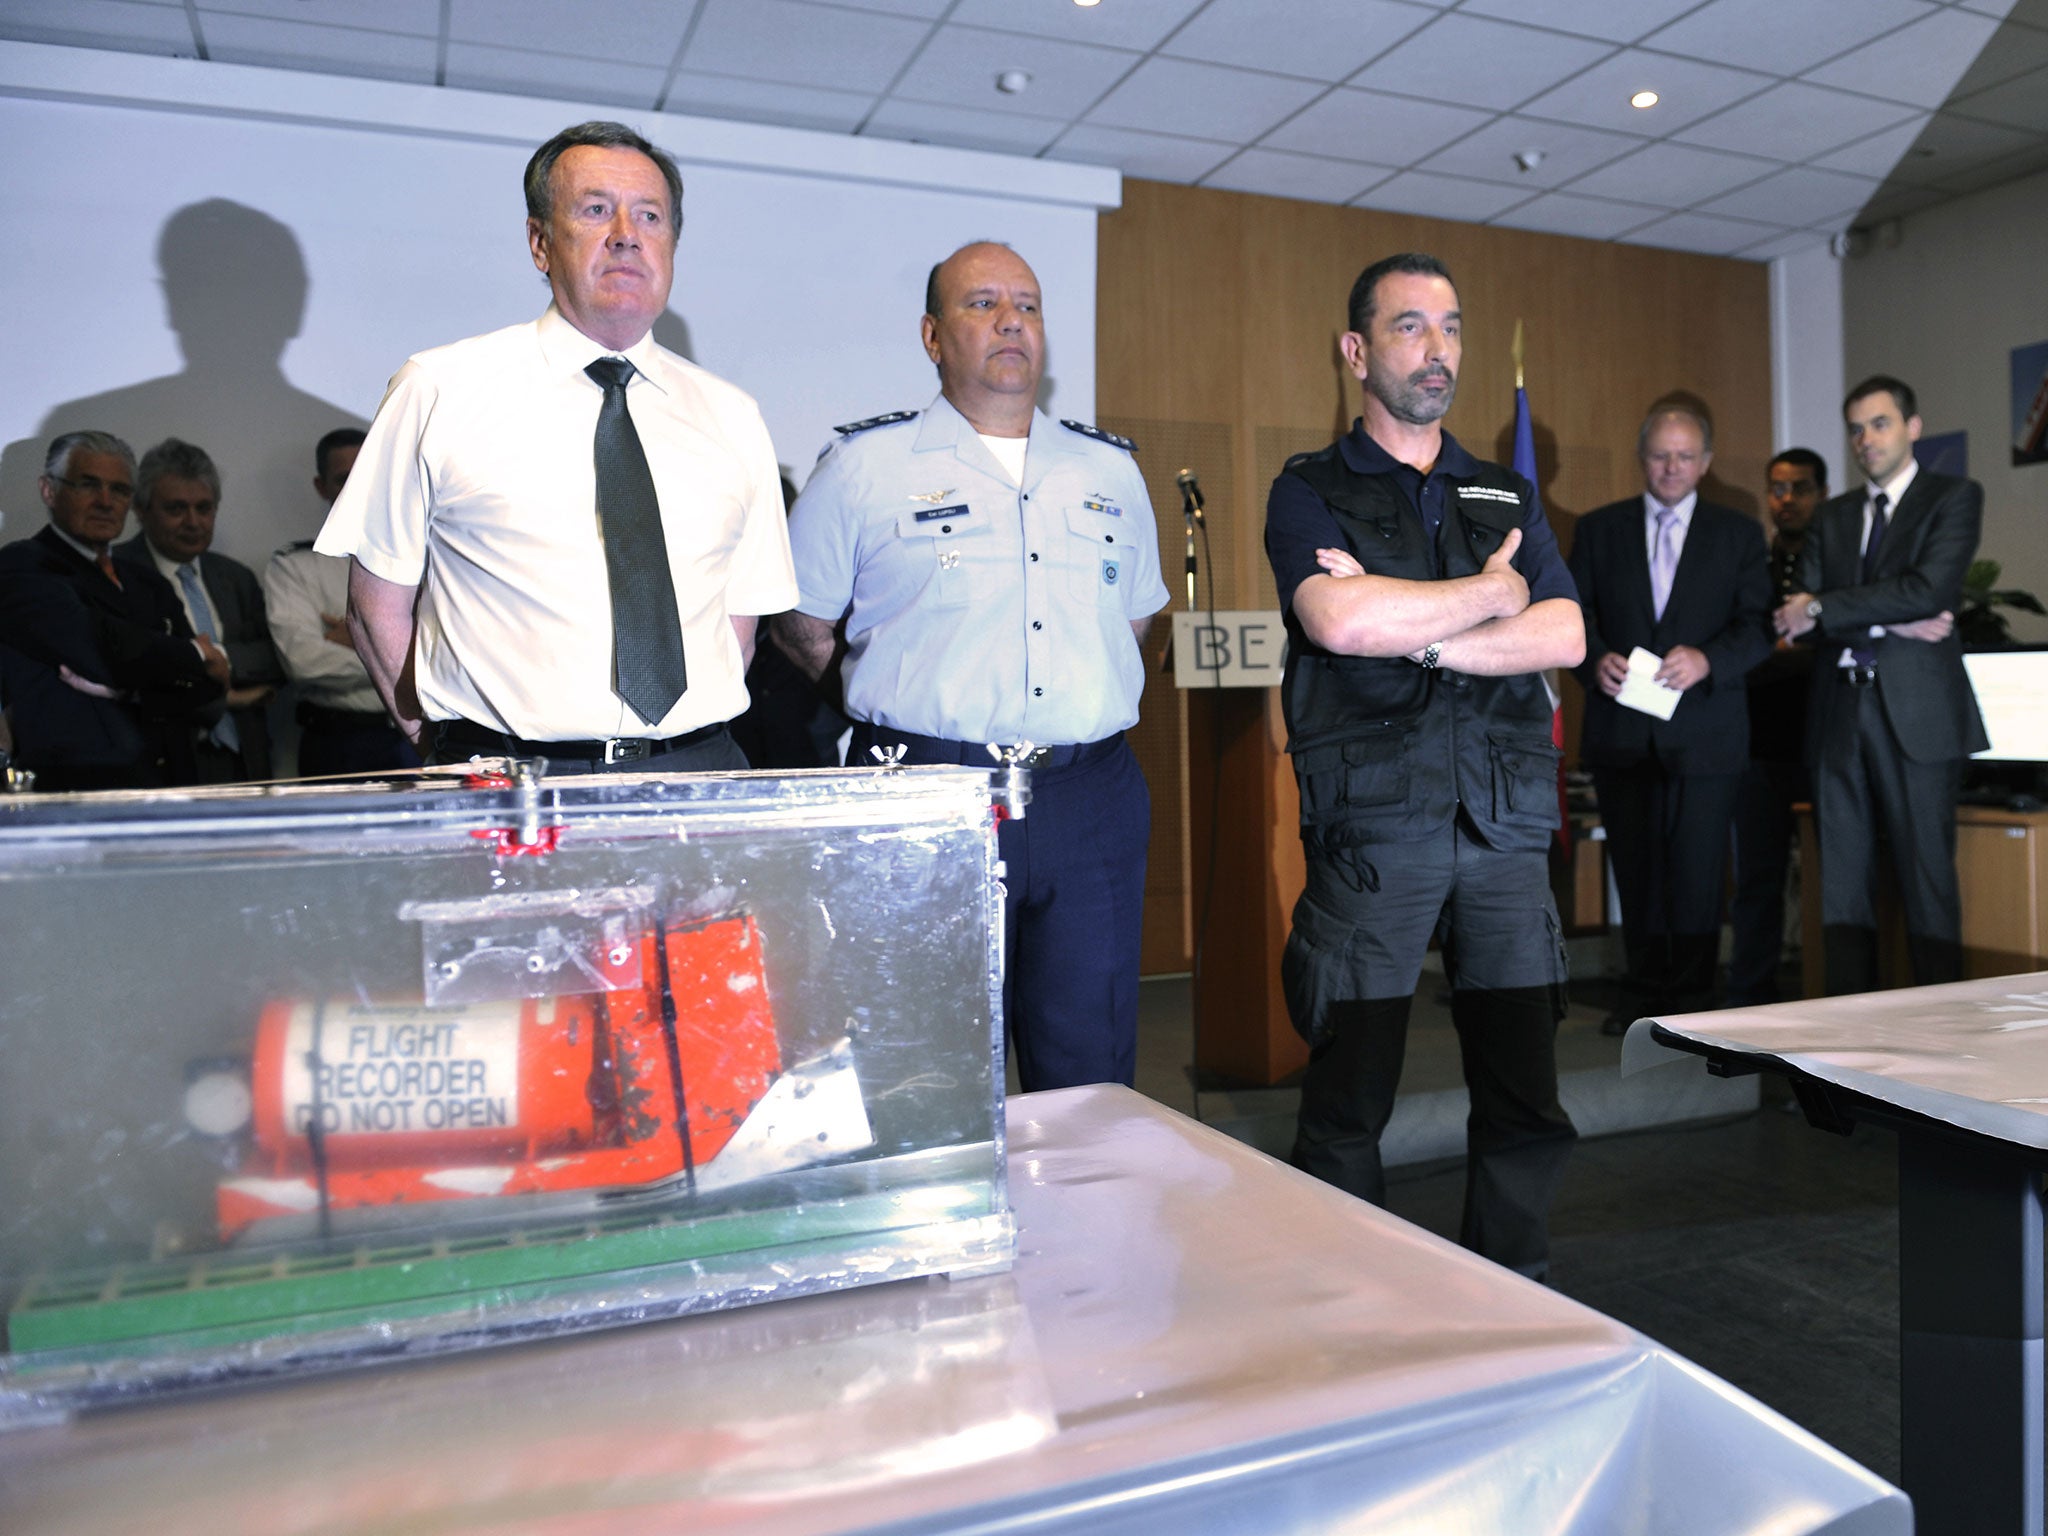 The flight recorder recovered from flight Air France 447 (AFP/Getty)